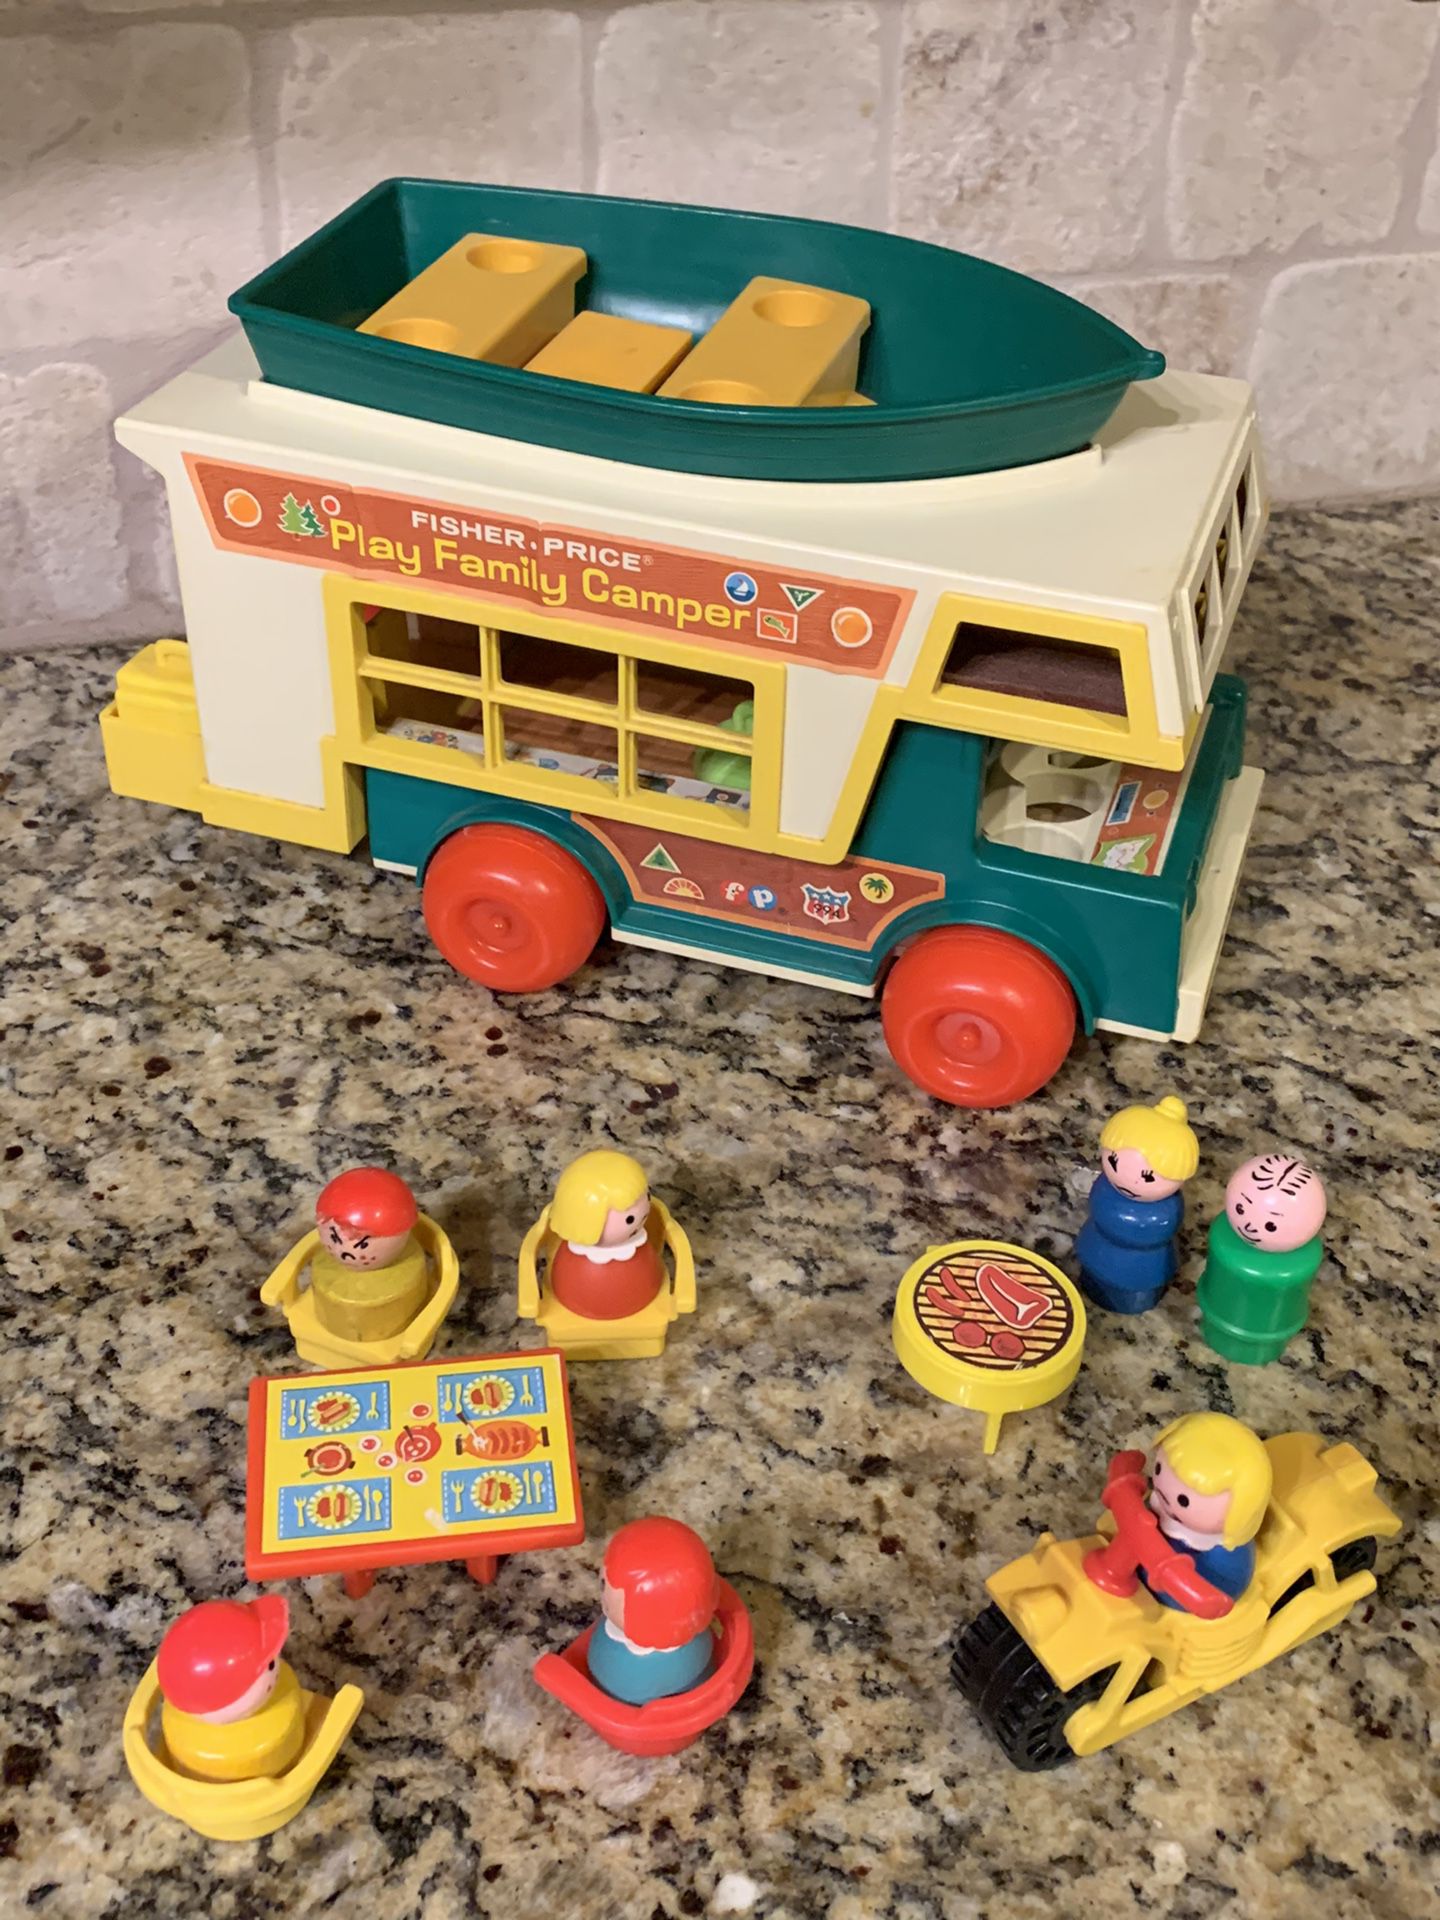 1972 Rare Vintage Fisher-Price Play Family Camper